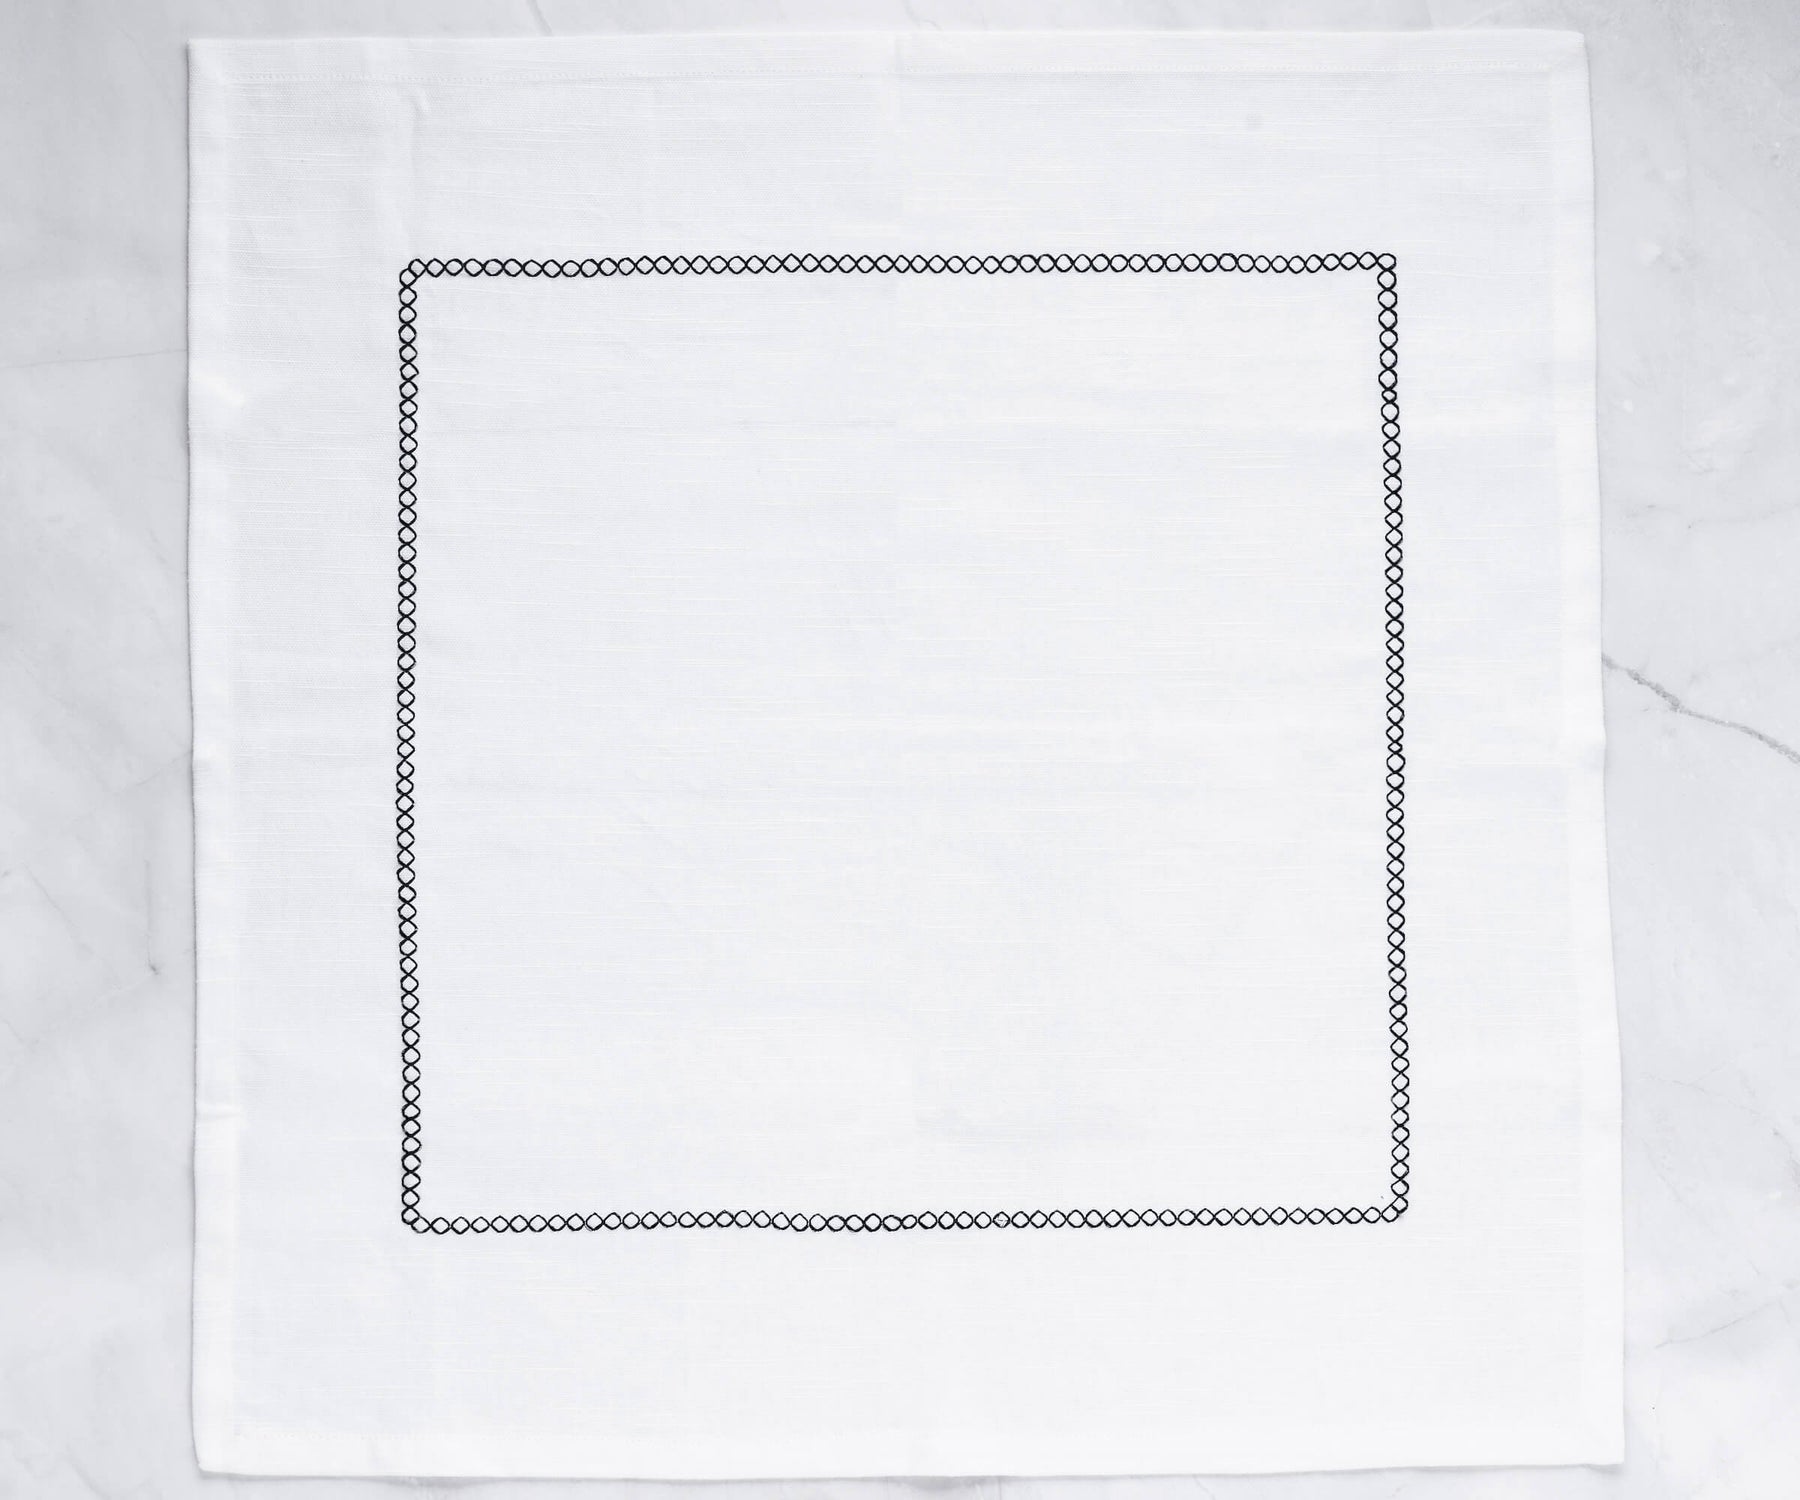 Napkins come in various sizes to suit different table settings and preferences.